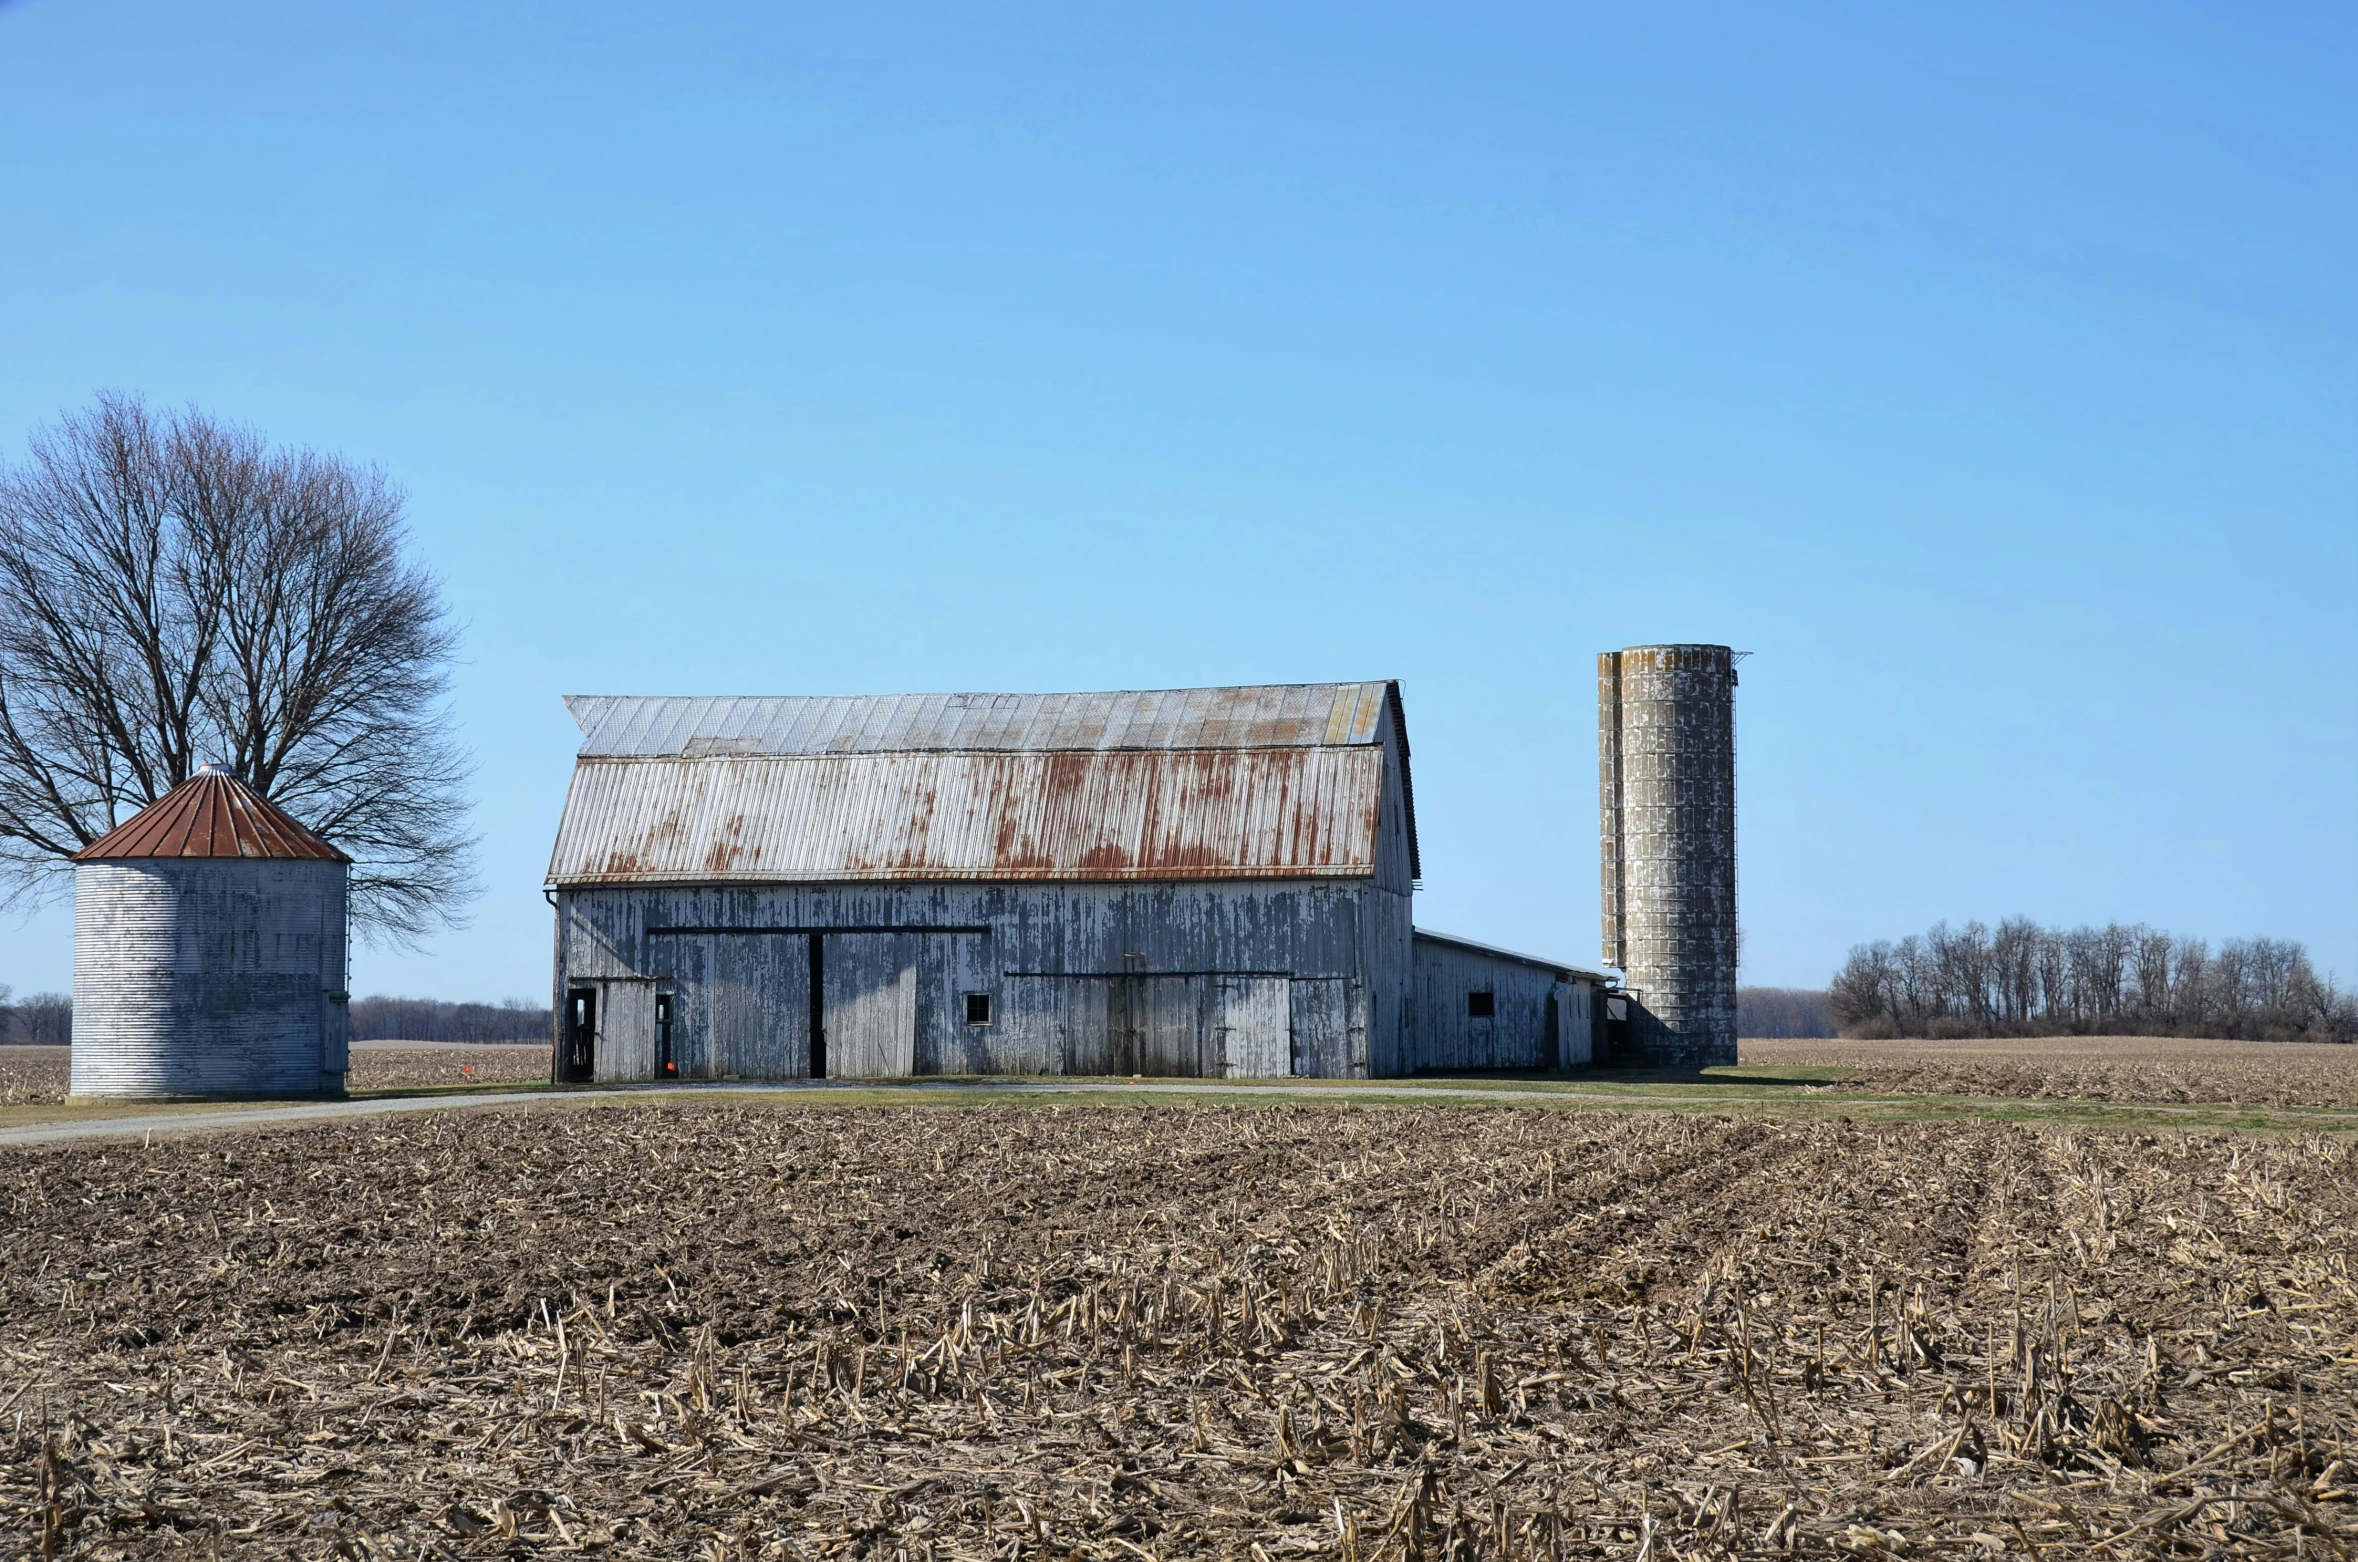 there is an old barn and silo in the middle of the field